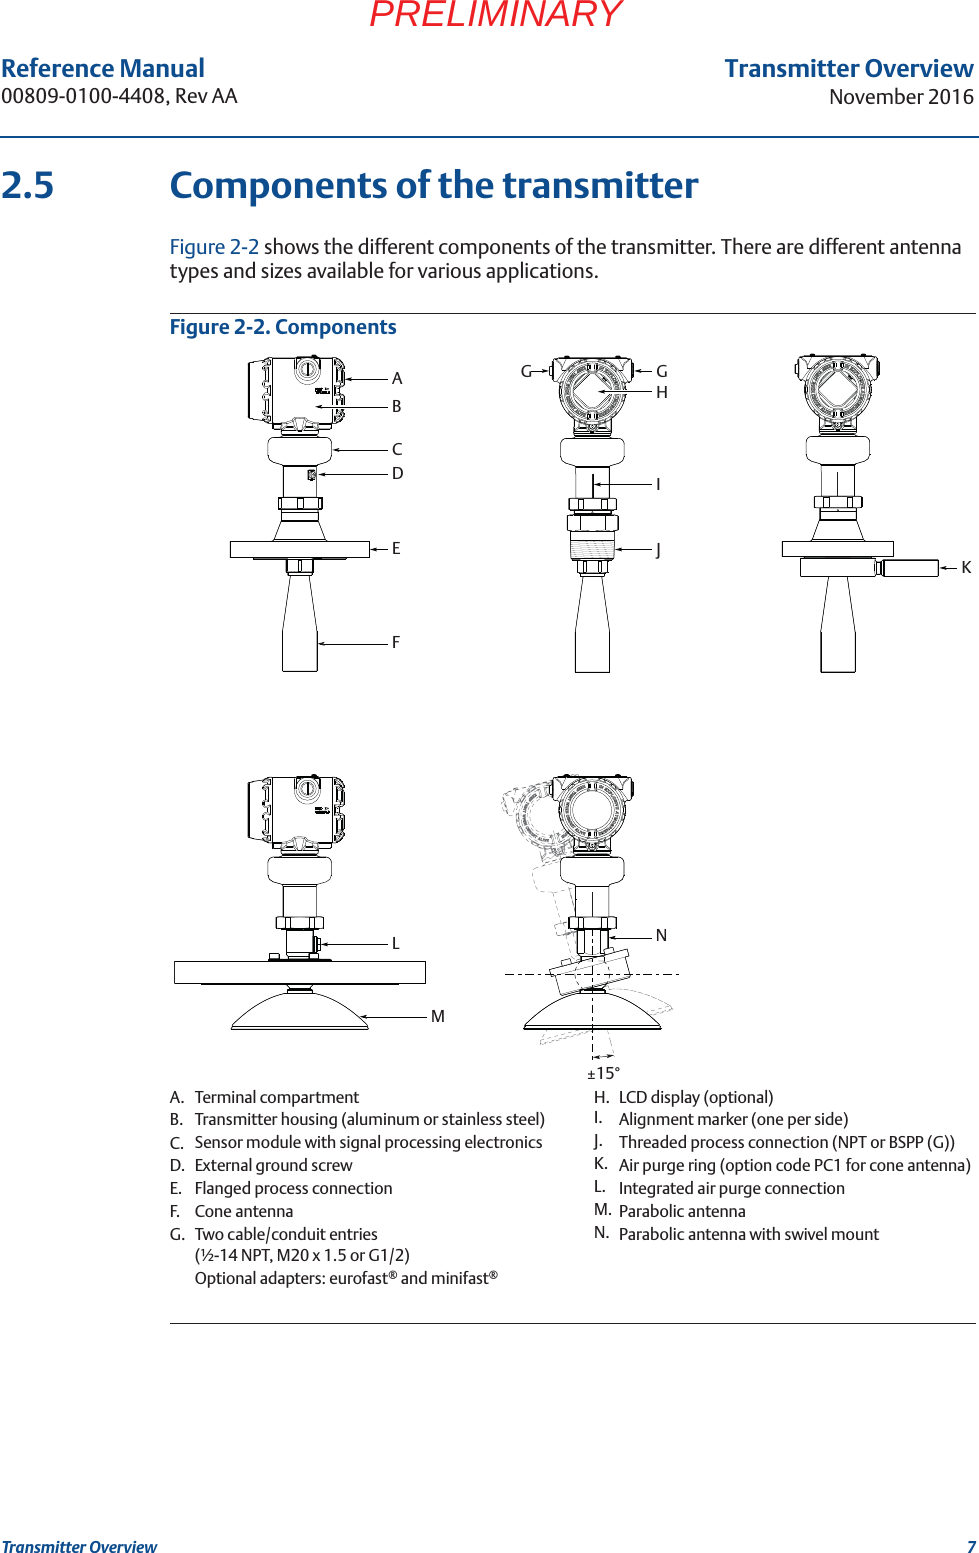 7Transmitter OverviewNovember 2016Transmitter OverviewReference Manual 00809-0100-4408, Rev AAPRELIMINARY2.5 Components of the transmitterFigure 2-2 shows the different components of the transmitter. There are different antenna types and sizes available for various applications.Figure 2-2. ComponentsA.B.C.D.E.F.G.Terminal compartmentTransmitter housing (aluminum or stainless steel)Sensor module with signal processing electronicsExternal ground screwFlanged process connectionCone antennaTwo cable/conduit entries (½-14 NPT, M20 x 1.5 or G1/2)Optional adapters: eurofast® and minifast®H.I.J.K.L.M.N.LCD display (optional)Alignment marker (one per side)Threaded process connection (NPT or BSPP (G))Air purge ring (option code PC1 for cone antenna)Integrated air purge connectionParabolic antennaParabolic antenna with swivel mountABCD EGKGJIFLMHN±15°